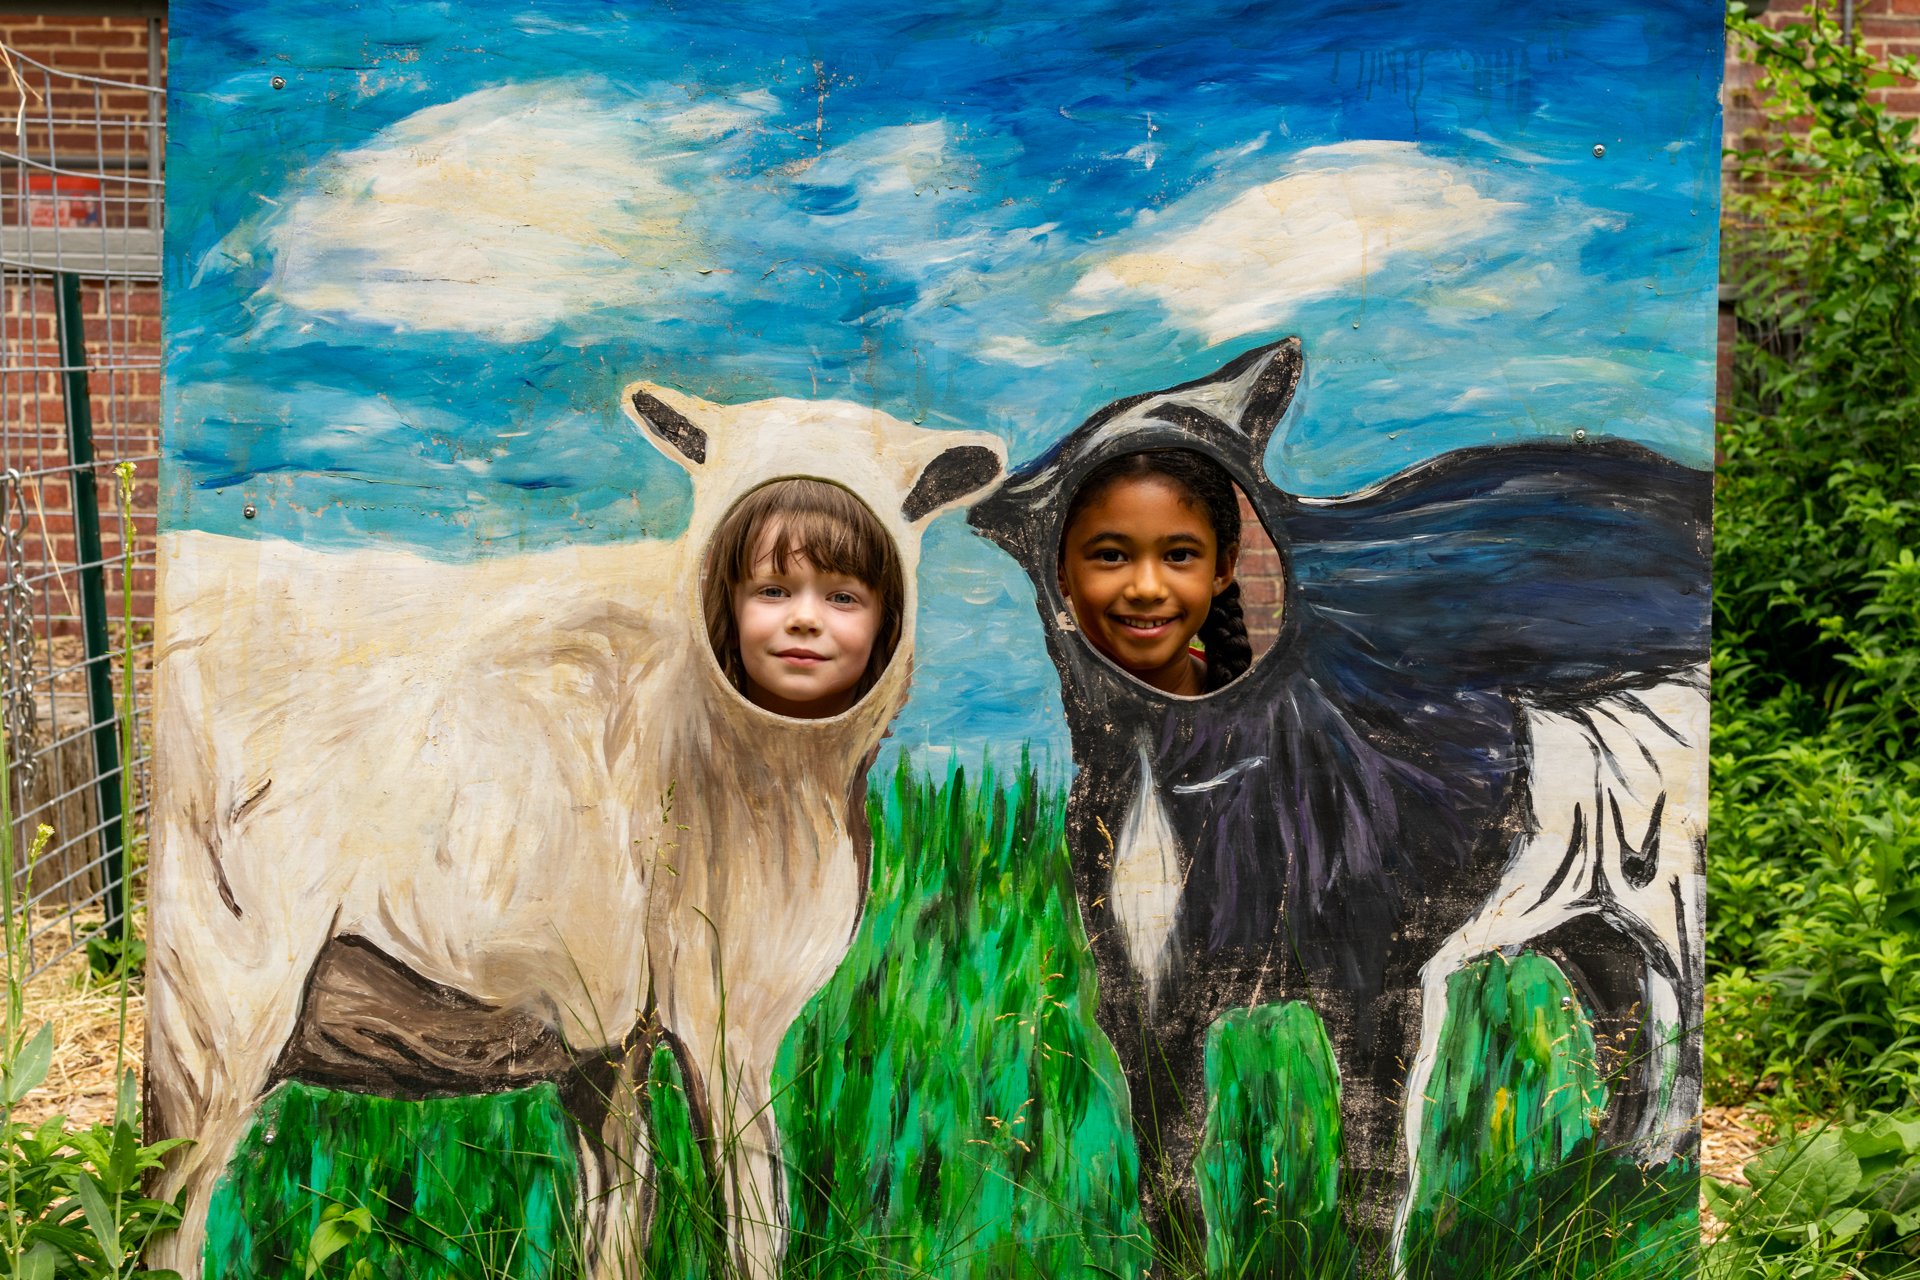 Two habitat campers pose for a photo behind a large painting of two goats with cutout circles so the kids can poke their faces through